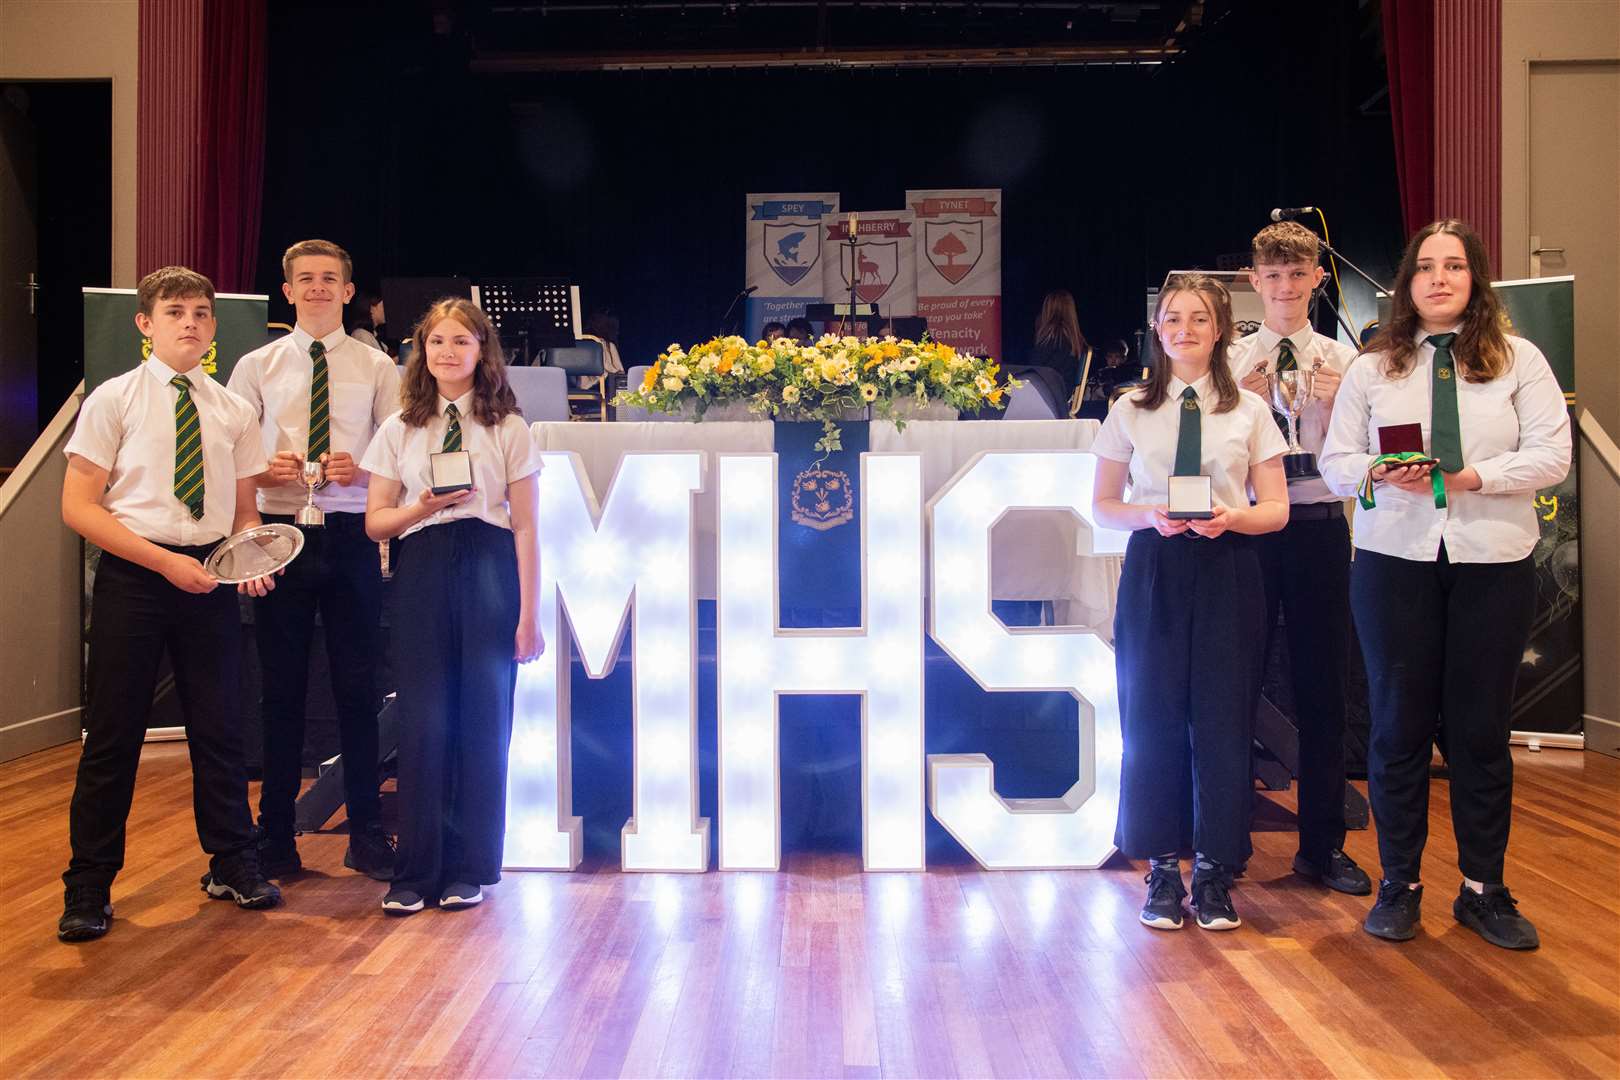 Celebrating their awards are (from left) Anthony Lewis, Rory Lyall, Erin Shand, Hebe Muckle, Ethan Lambourne and Dux Ellen Nicol. Picture: Daniel Forsyth